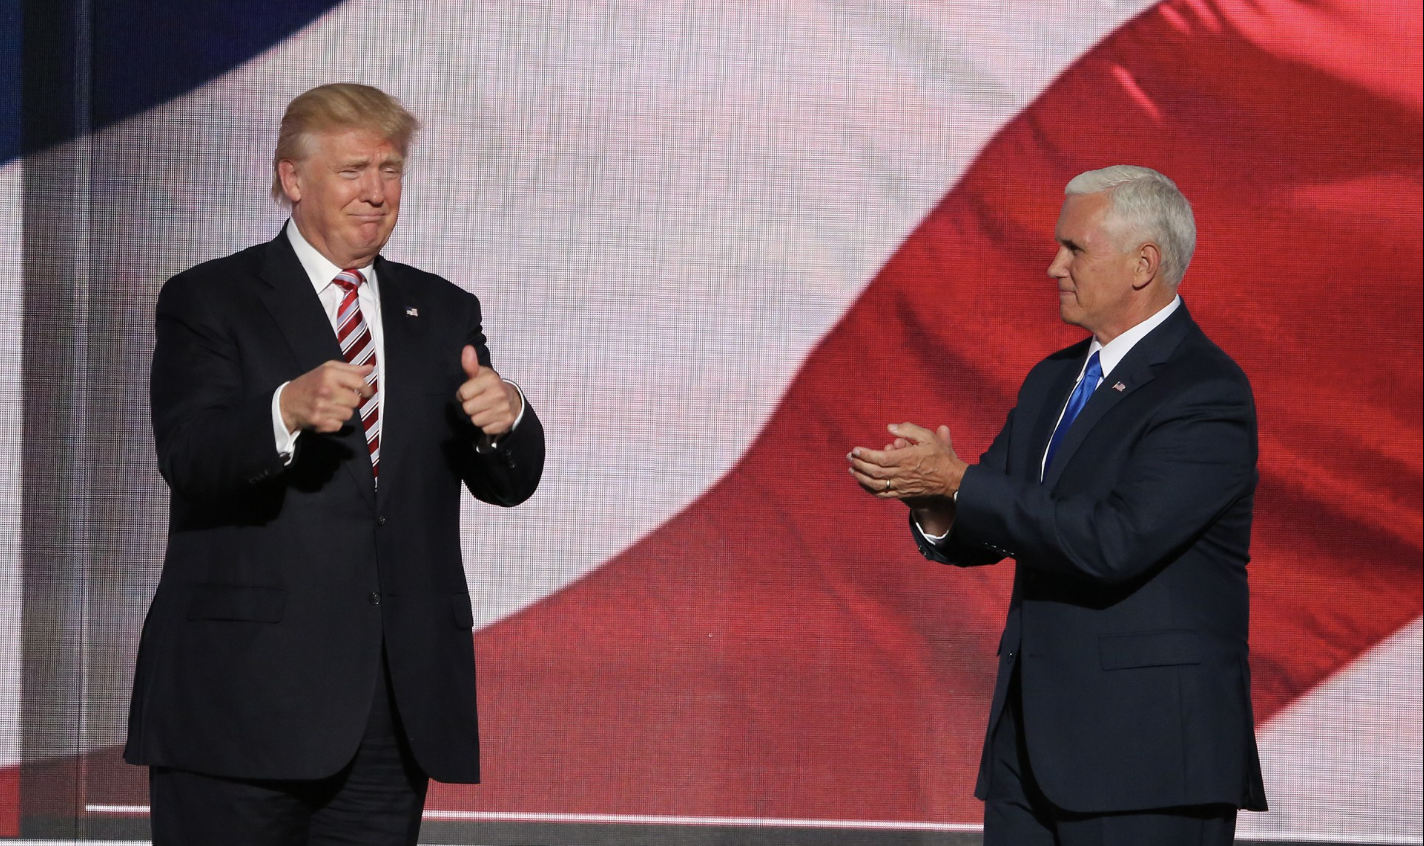 Republican presidential nominee Donald Trump, left, gives his running mate, Indiana Governor Mike Pence, a thumbs up after Pence addressed the Republican National Convention. Photo: A. Shaker/VOA